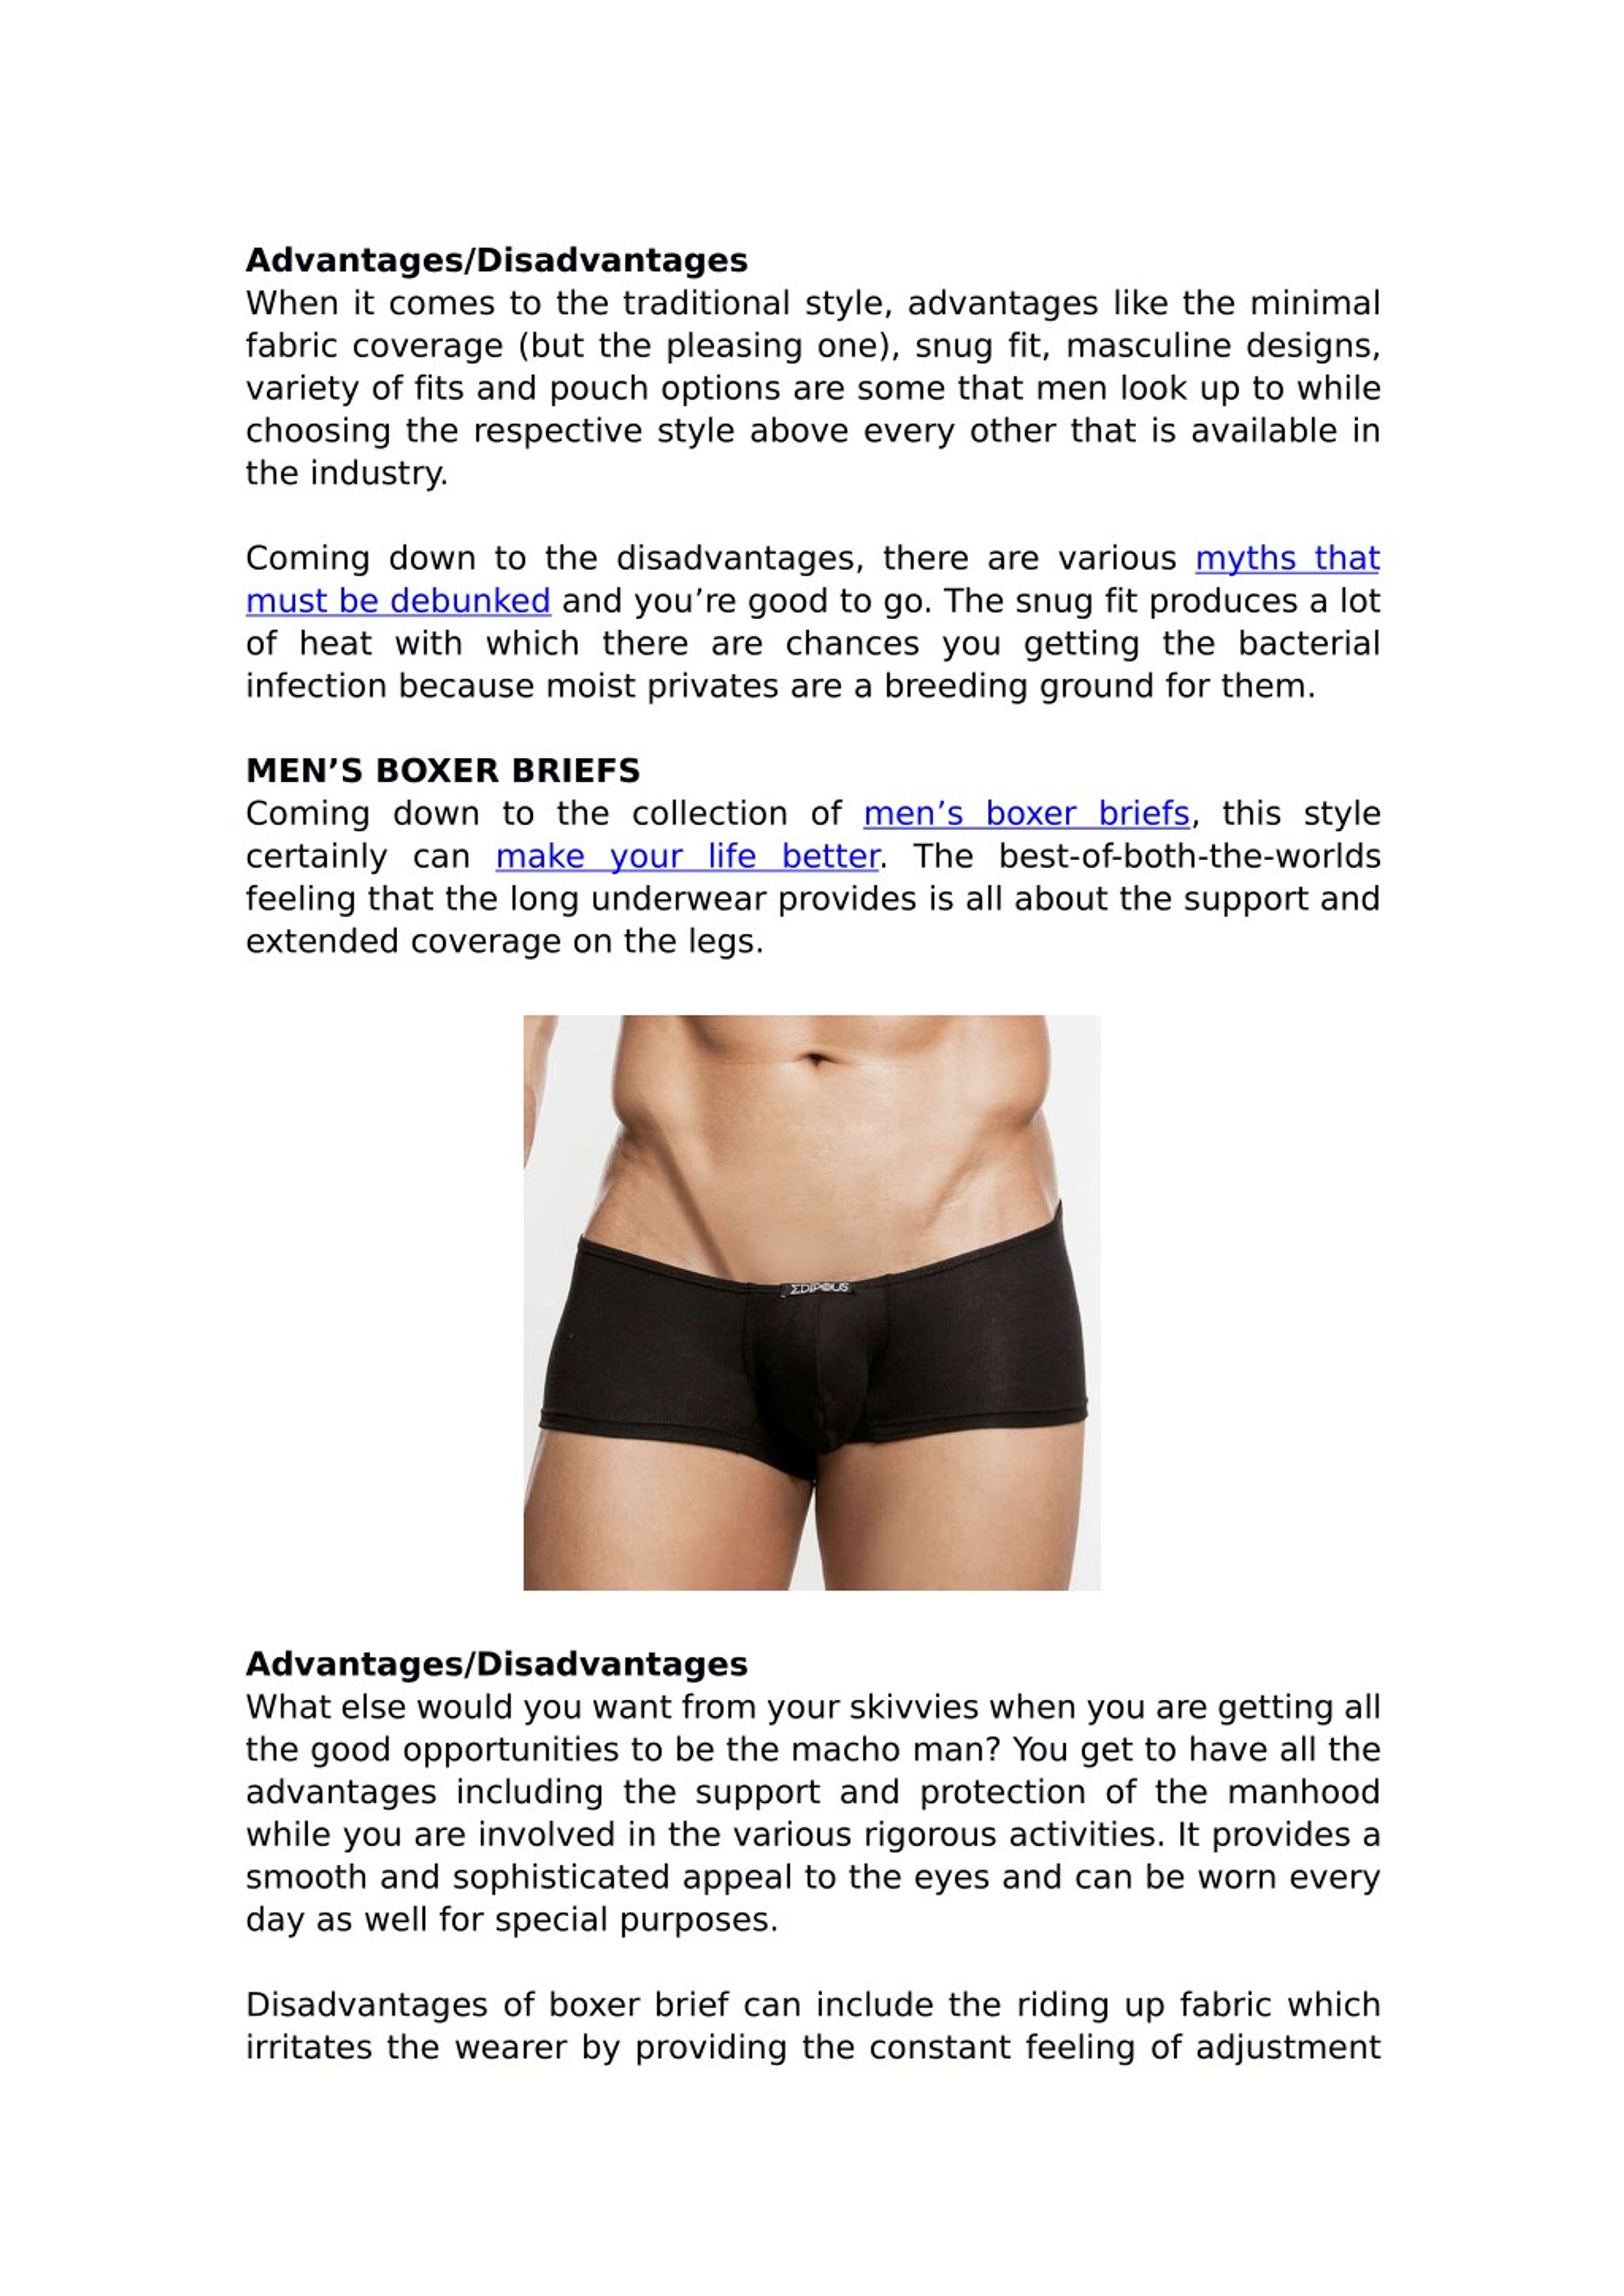 What are the advantages and disadvantages to wearing brief panties